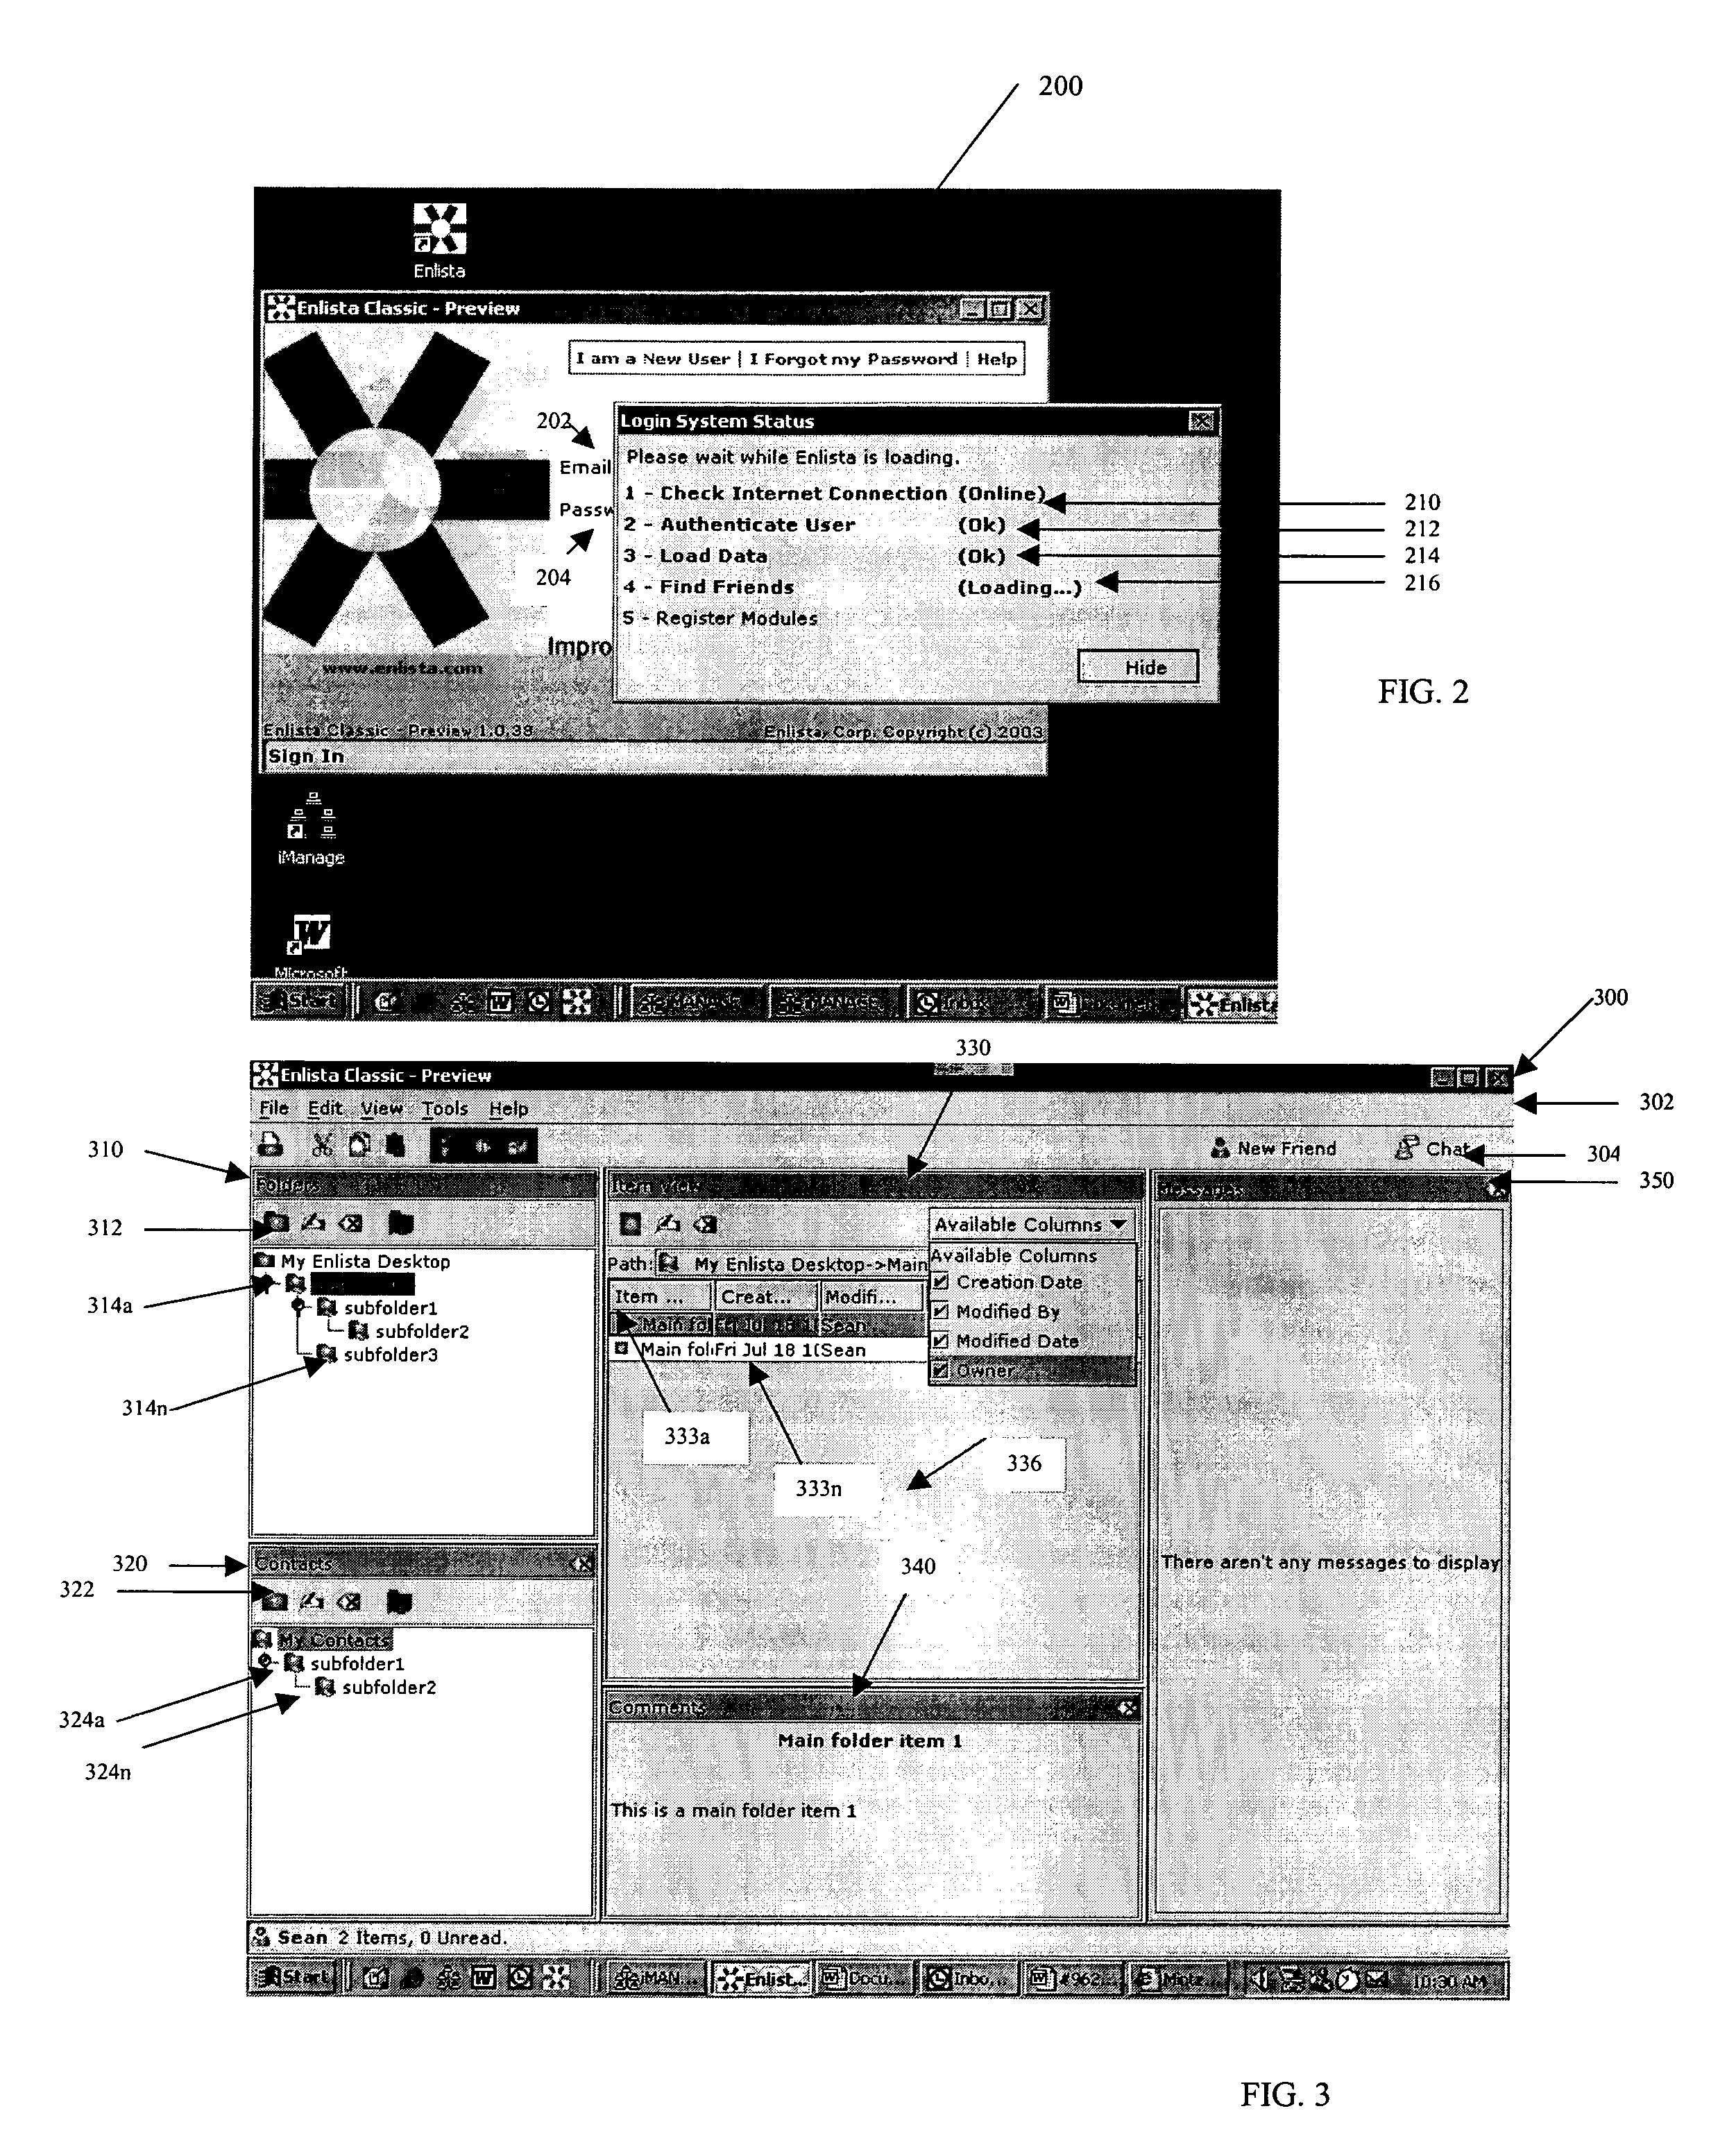 System and method for creating and selectively sharing data elements in a peer-to-peer network